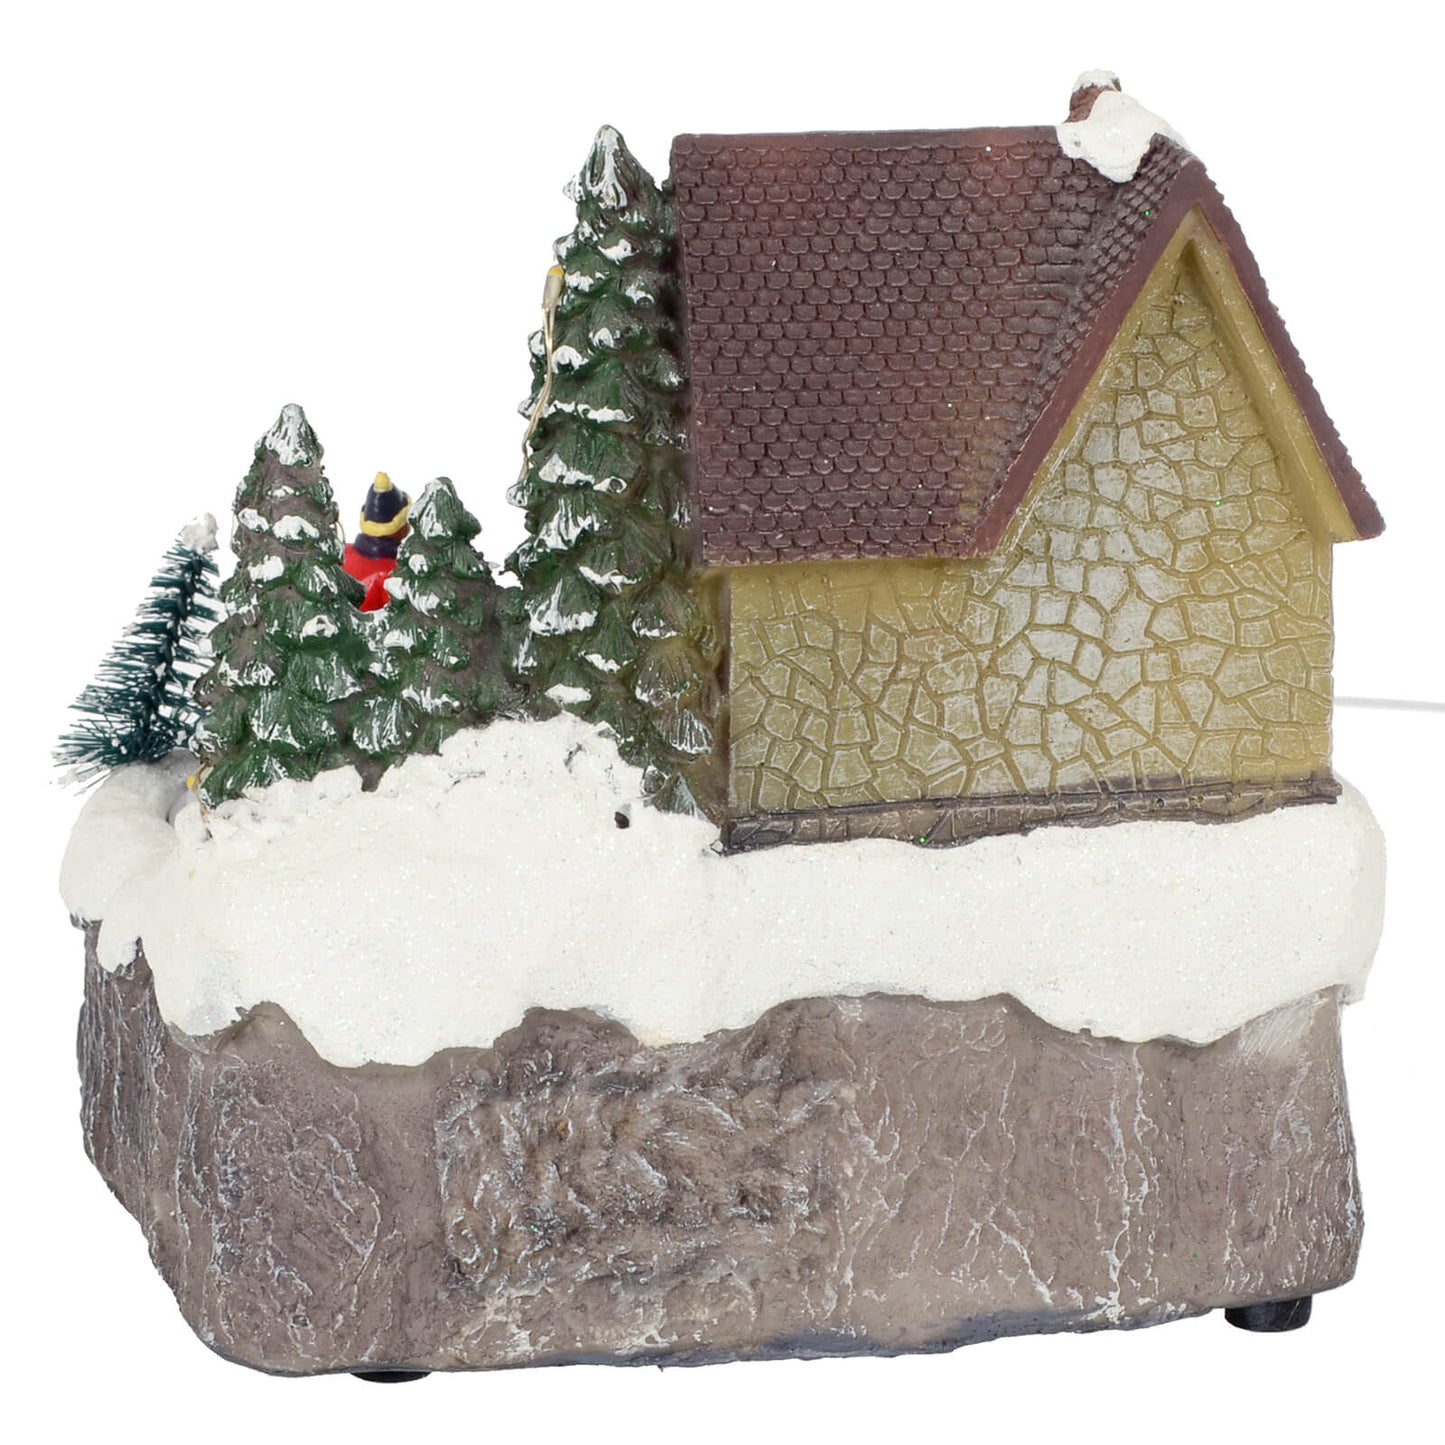 Back view of Village house snow scene with glittering snow and rock effect base